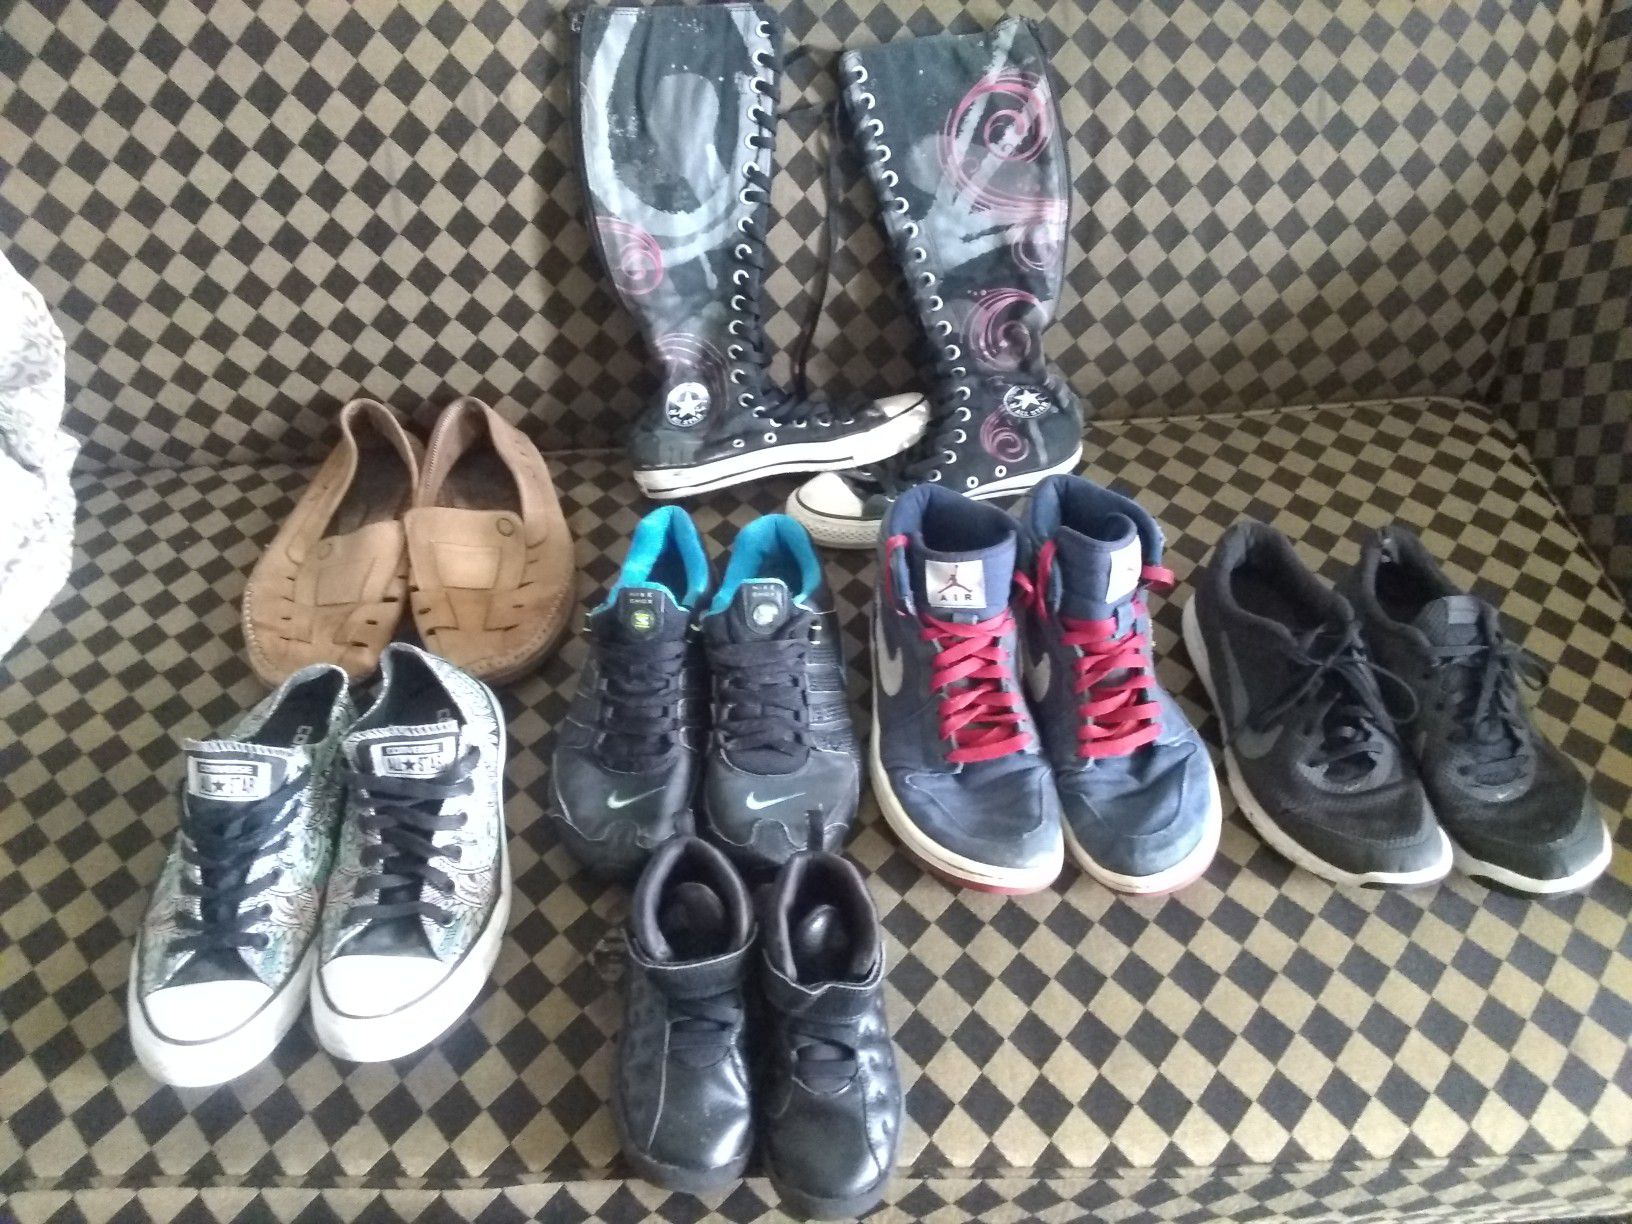 Variety of shoes